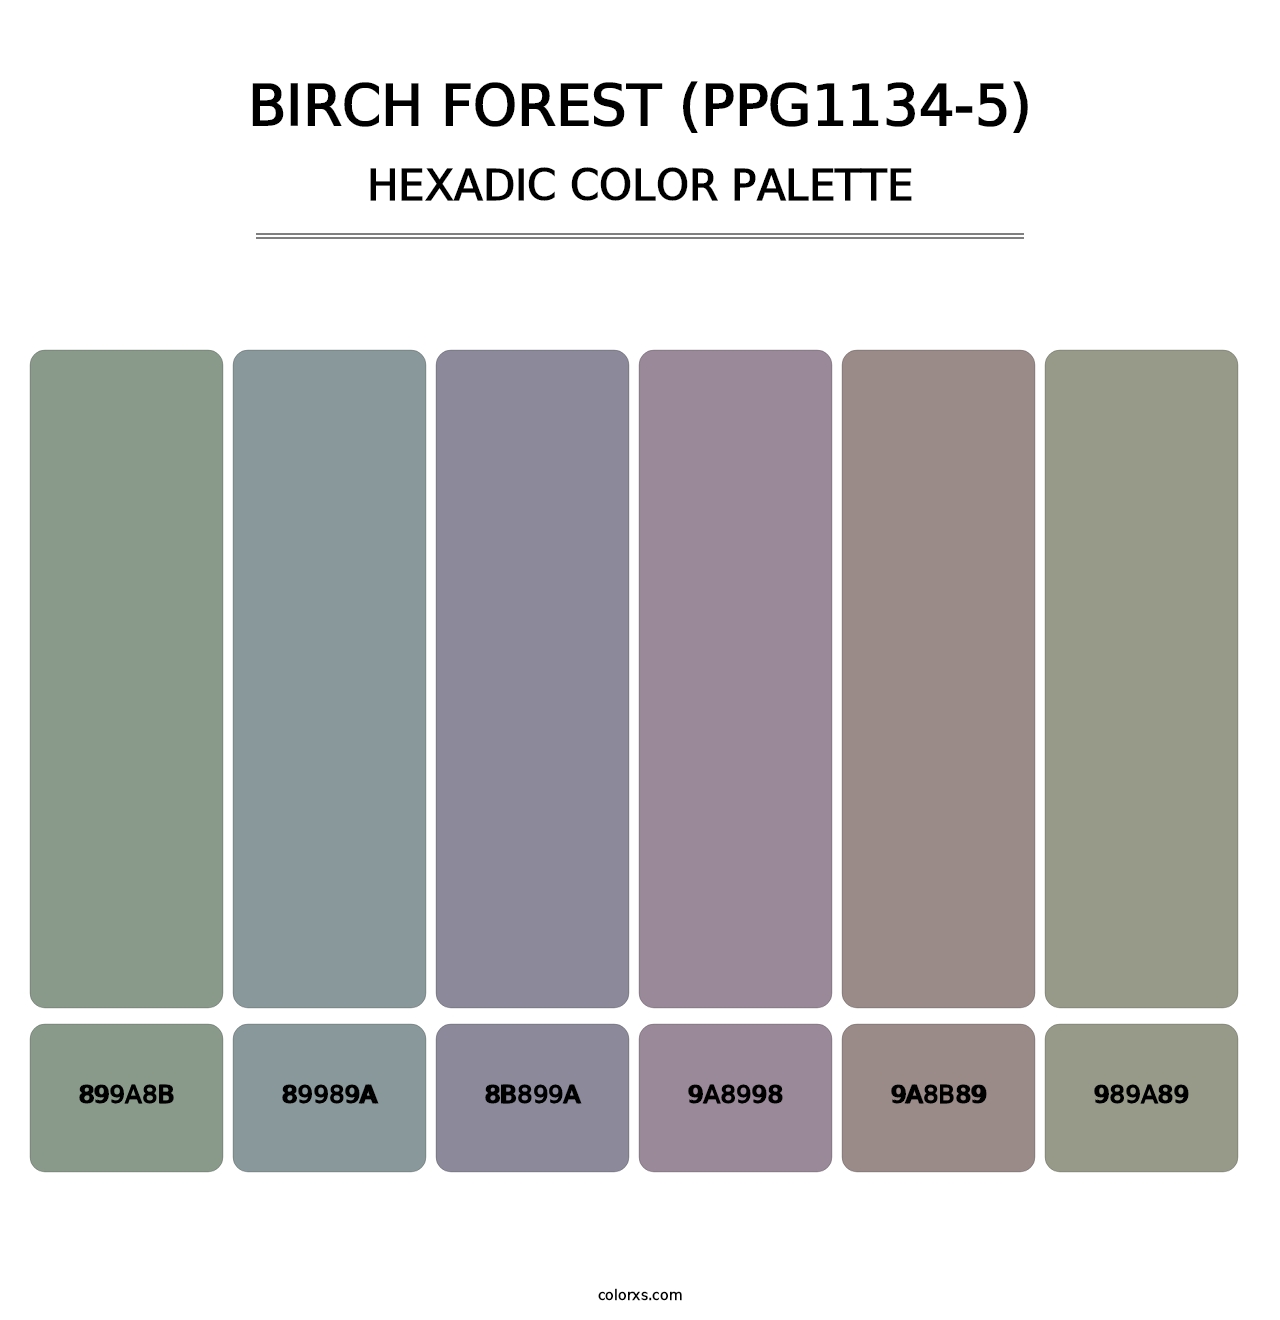 Birch Forest (PPG1134-5) - Hexadic Color Palette